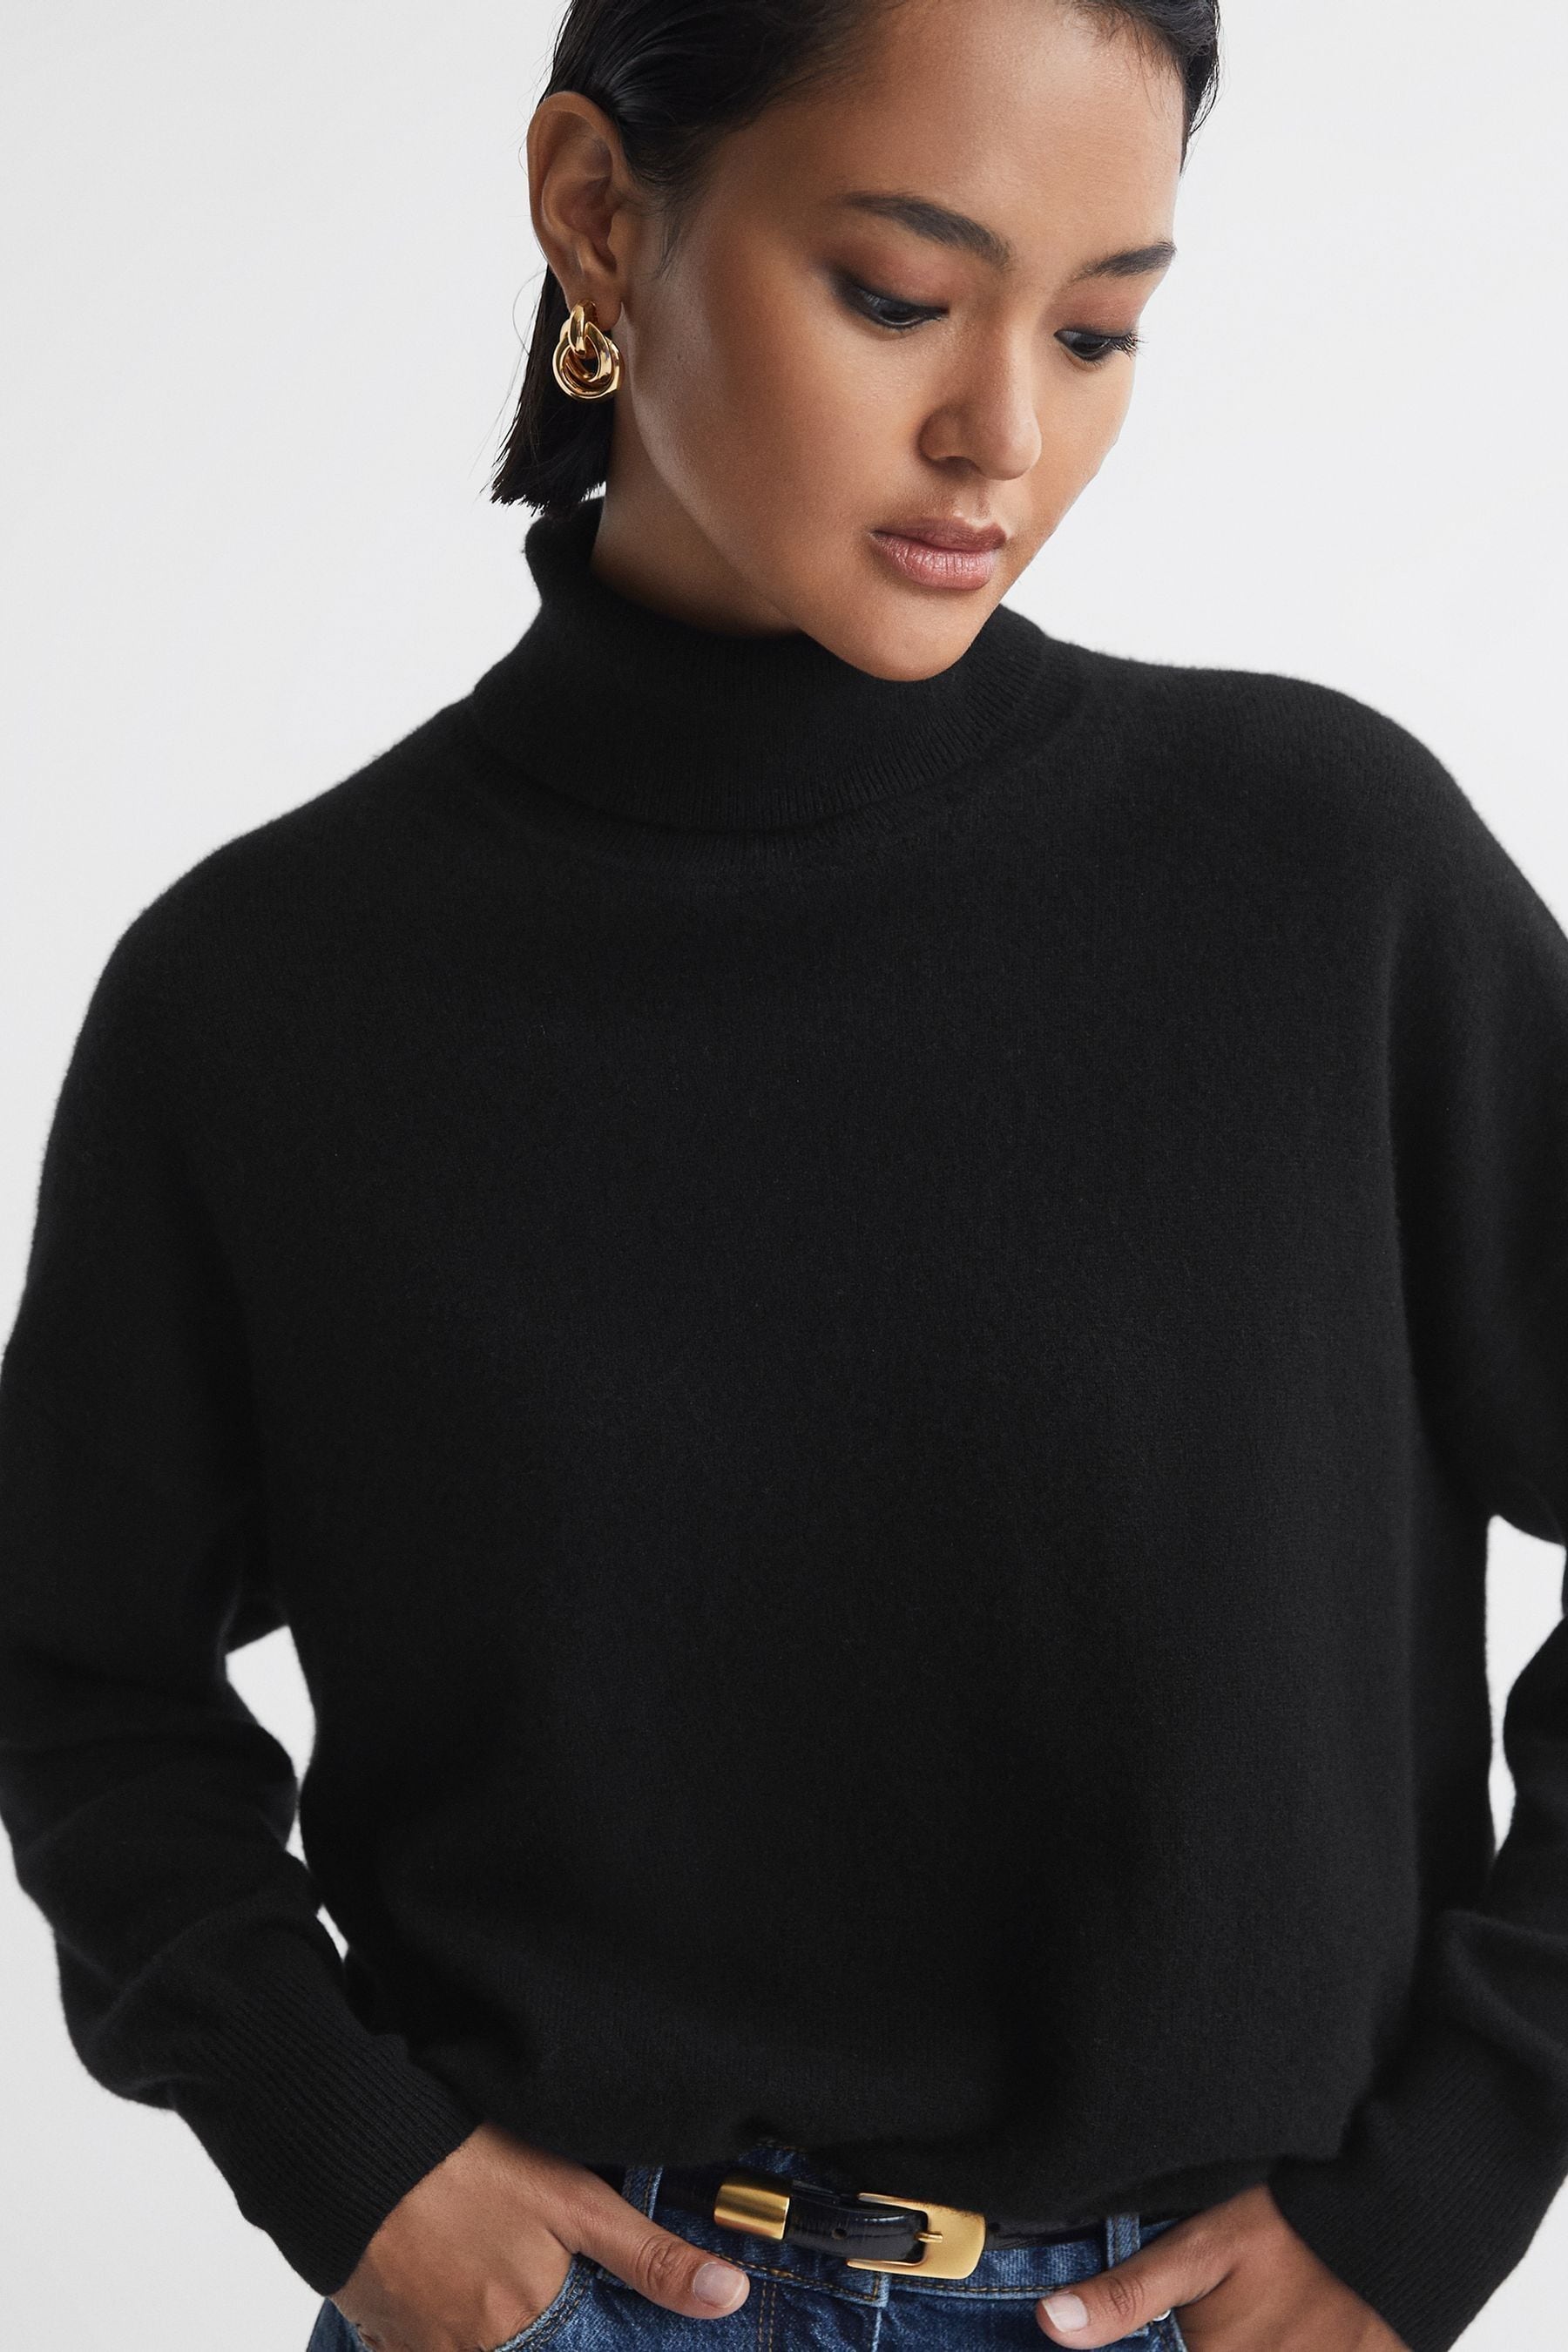 Reiss Mabel - Black Fitted Cashmere Roll Neck Top, L